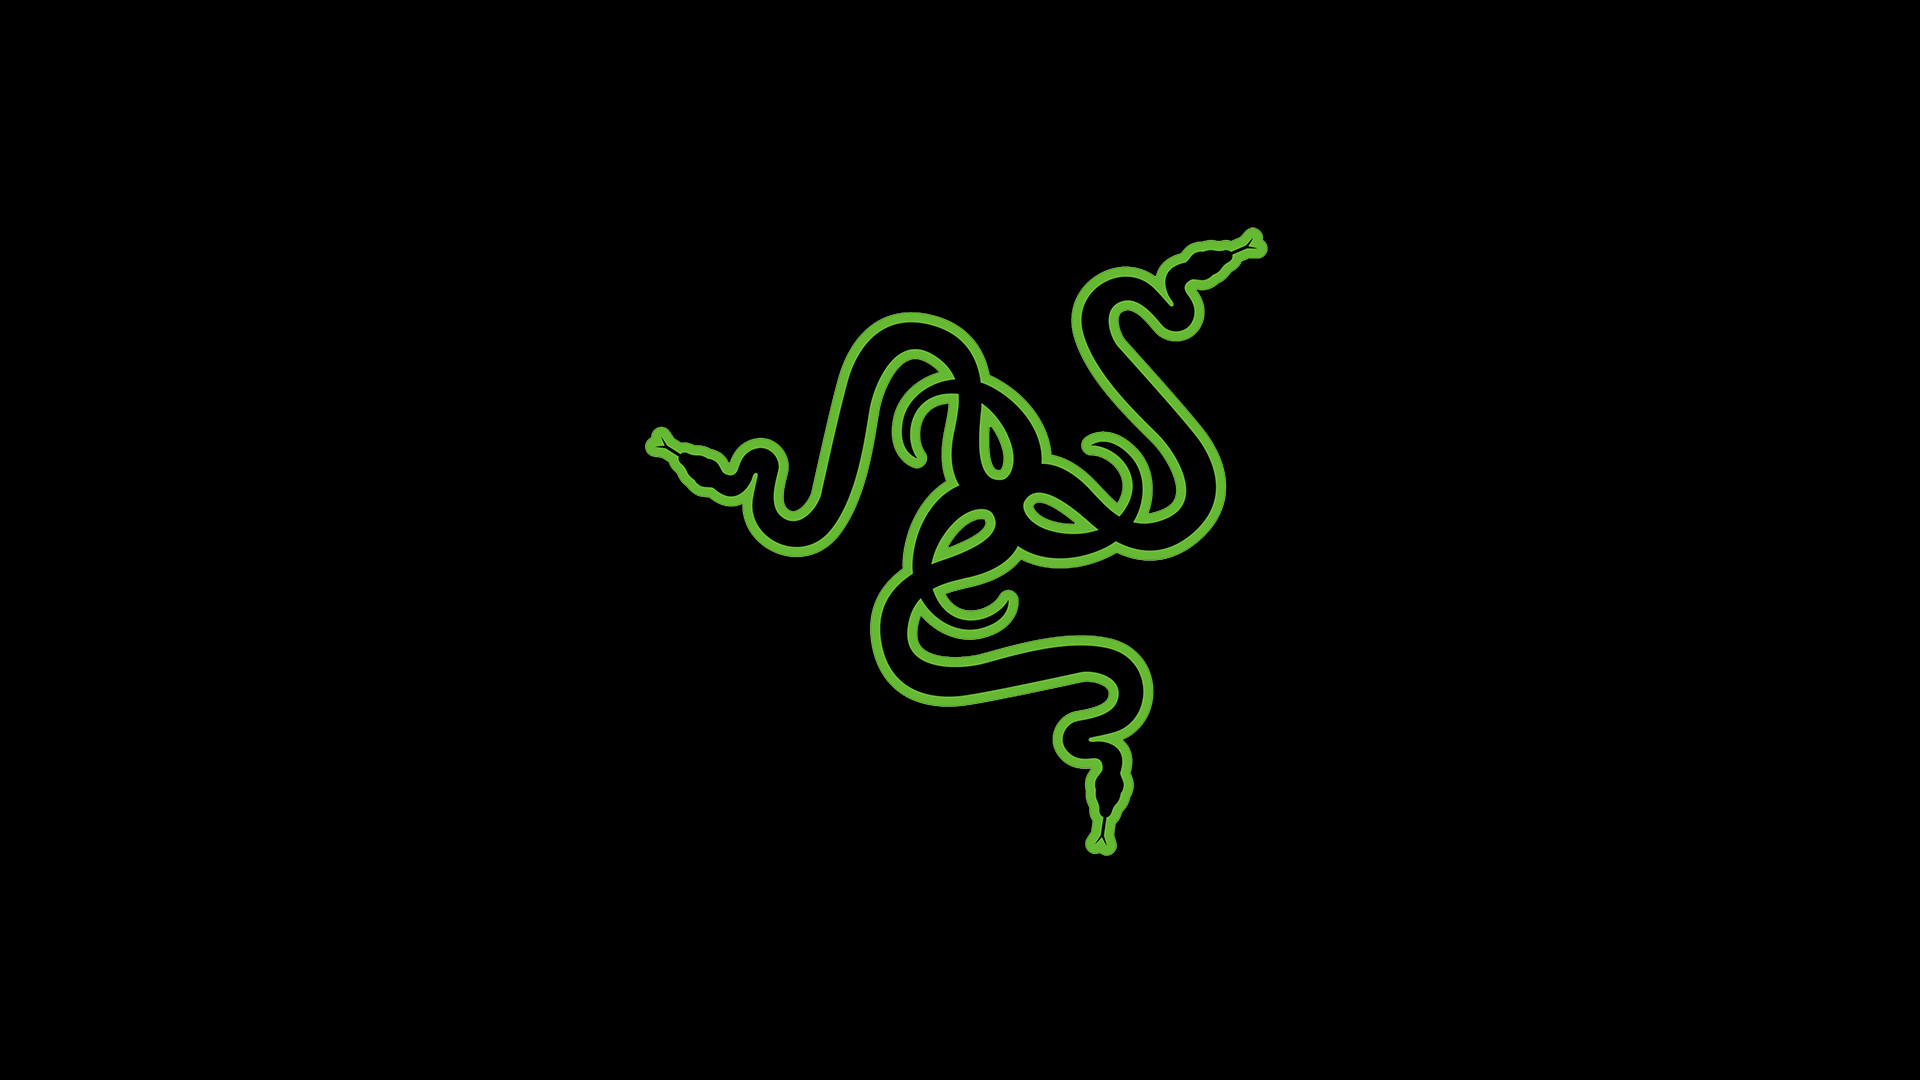 (1920×1080) Made this minimalist wallpaper for Razer fans.